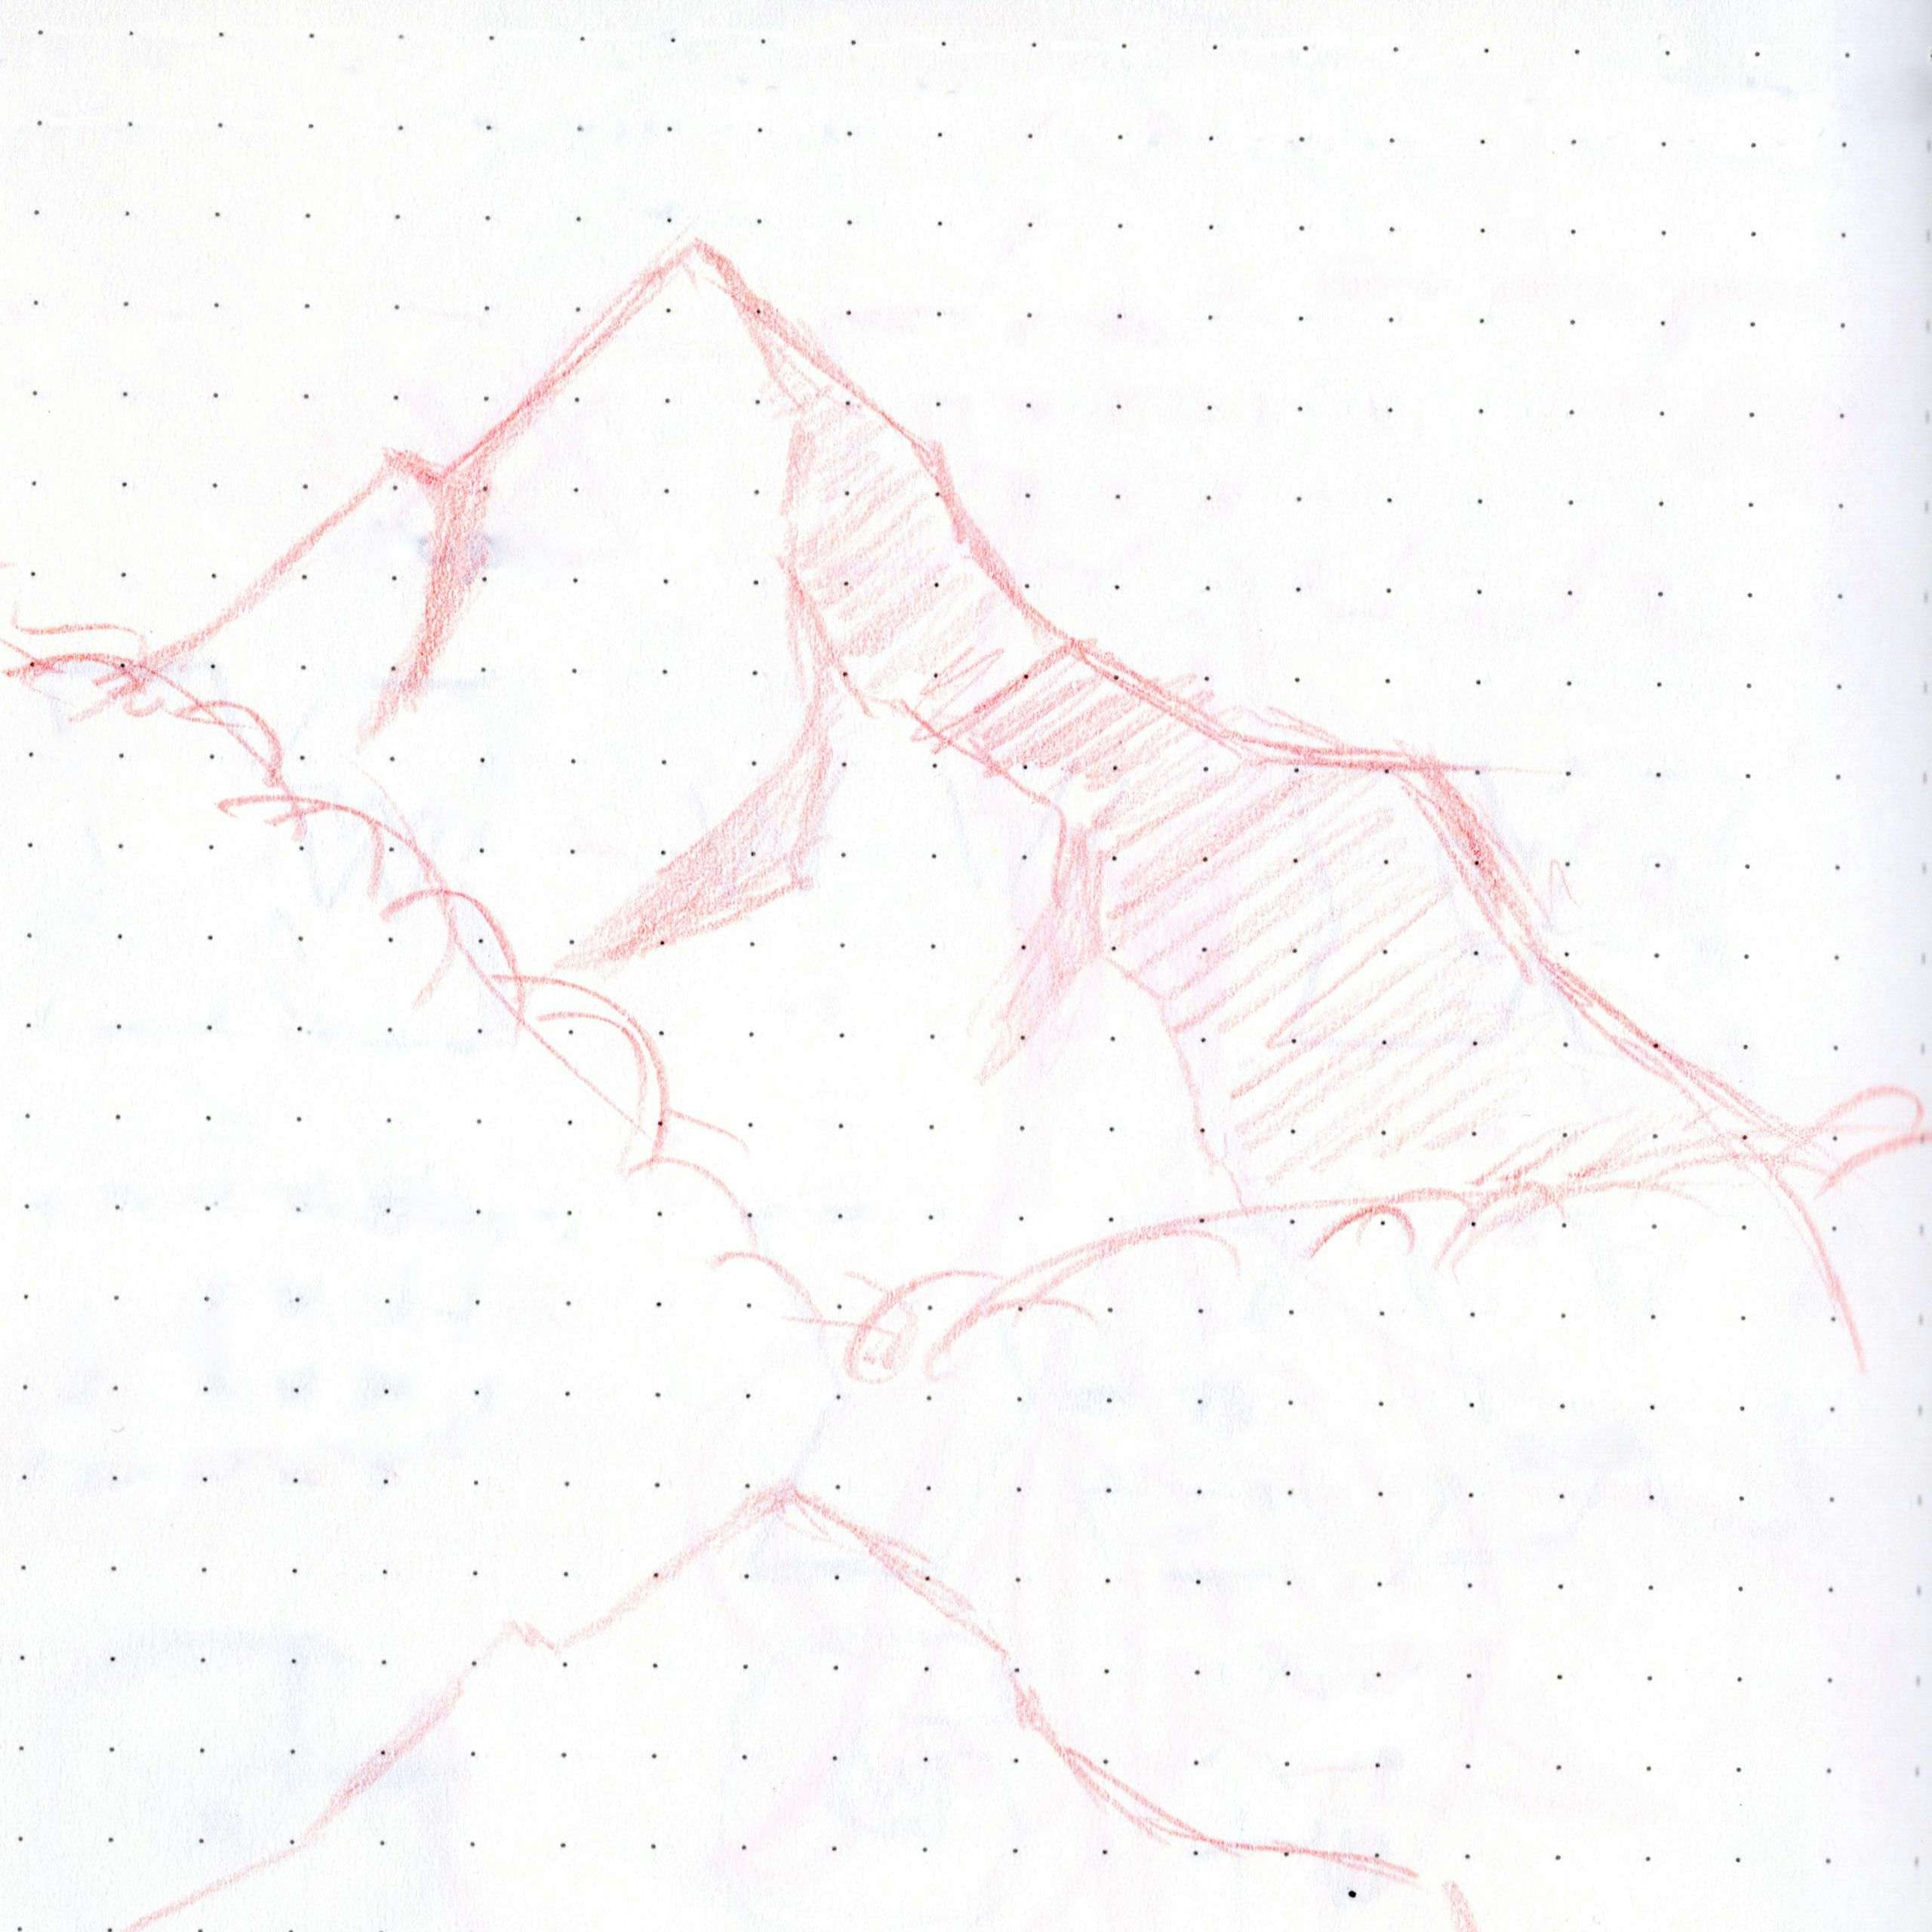 Winter views of Mont Charvin from Les Saisies. Initial paper sketch for a minimalist illustration by Xavier Wendling.